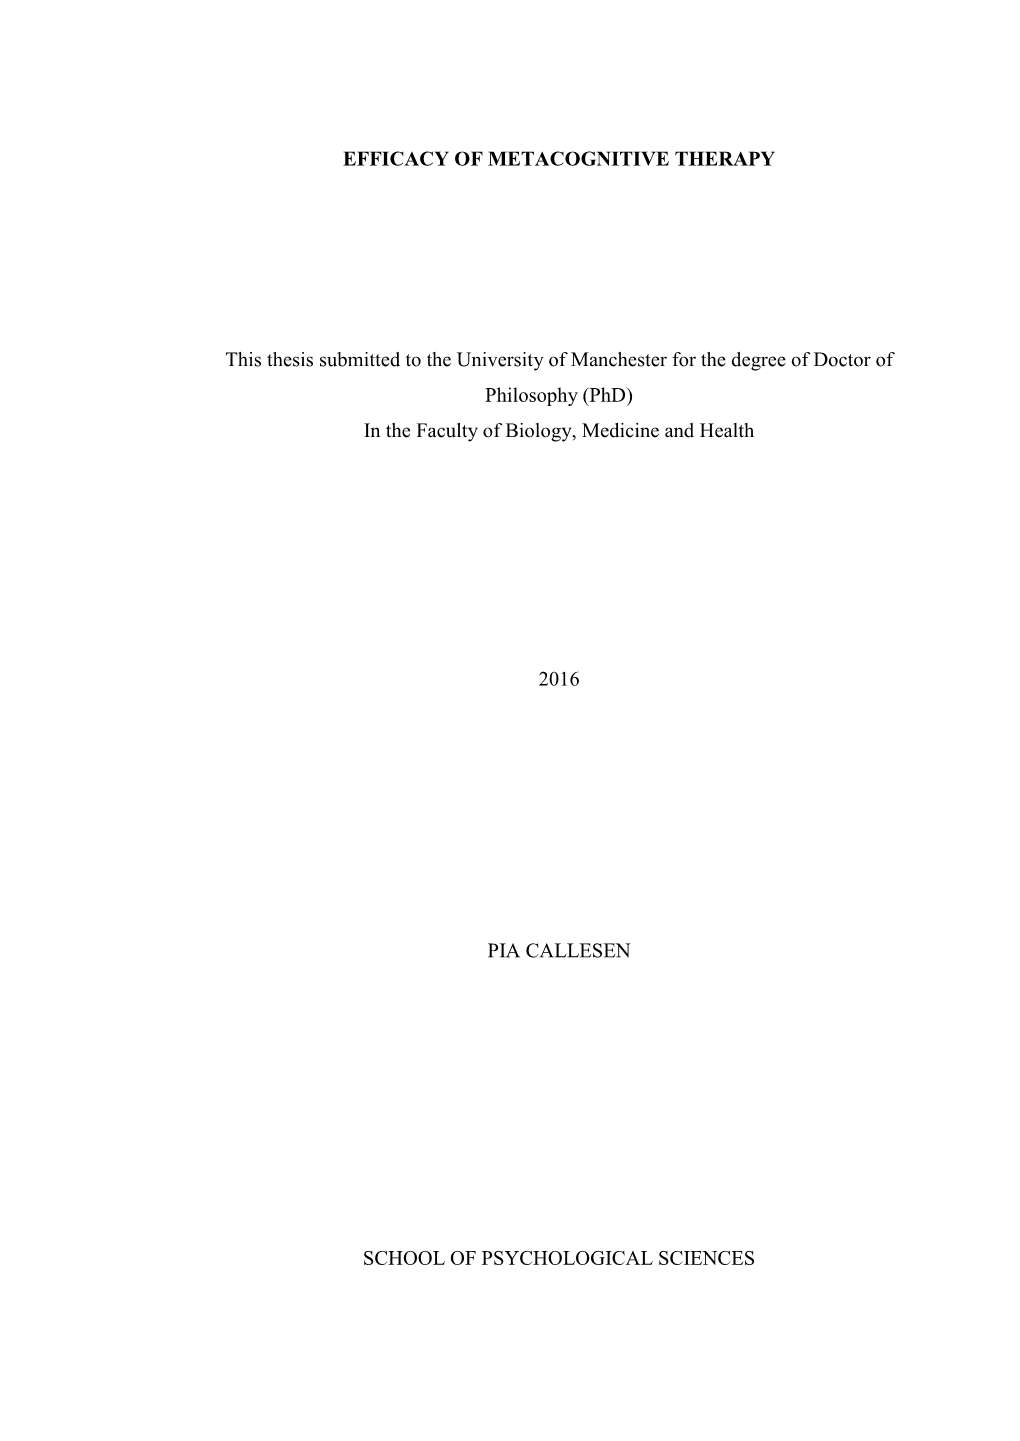 EFFICACY of METACOGNITIVE THERAPY This Thesis Submitted to the University of Manchester for the Degree of Doctor of Philosophy